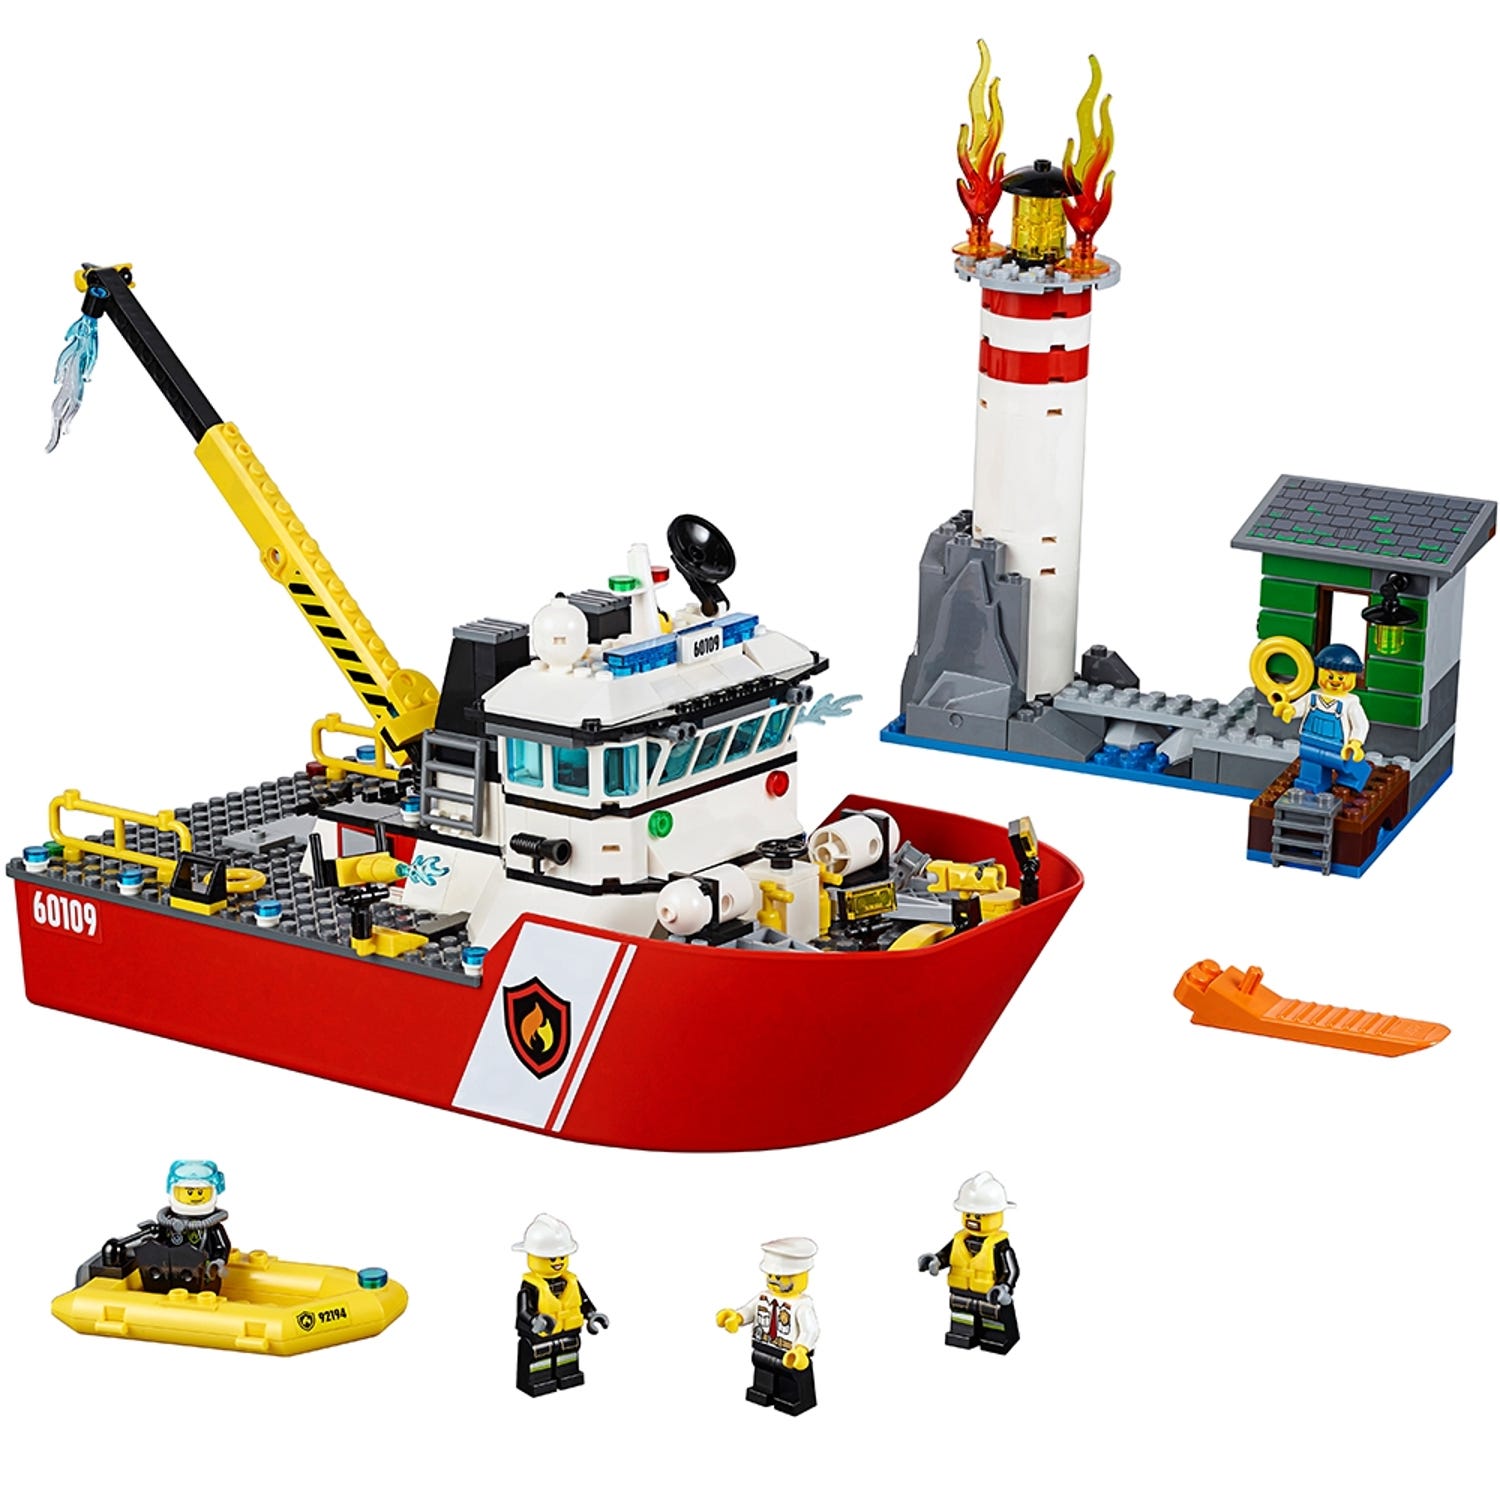 Fire 60109 | City | Buy online at the Official LEGO® Shop US